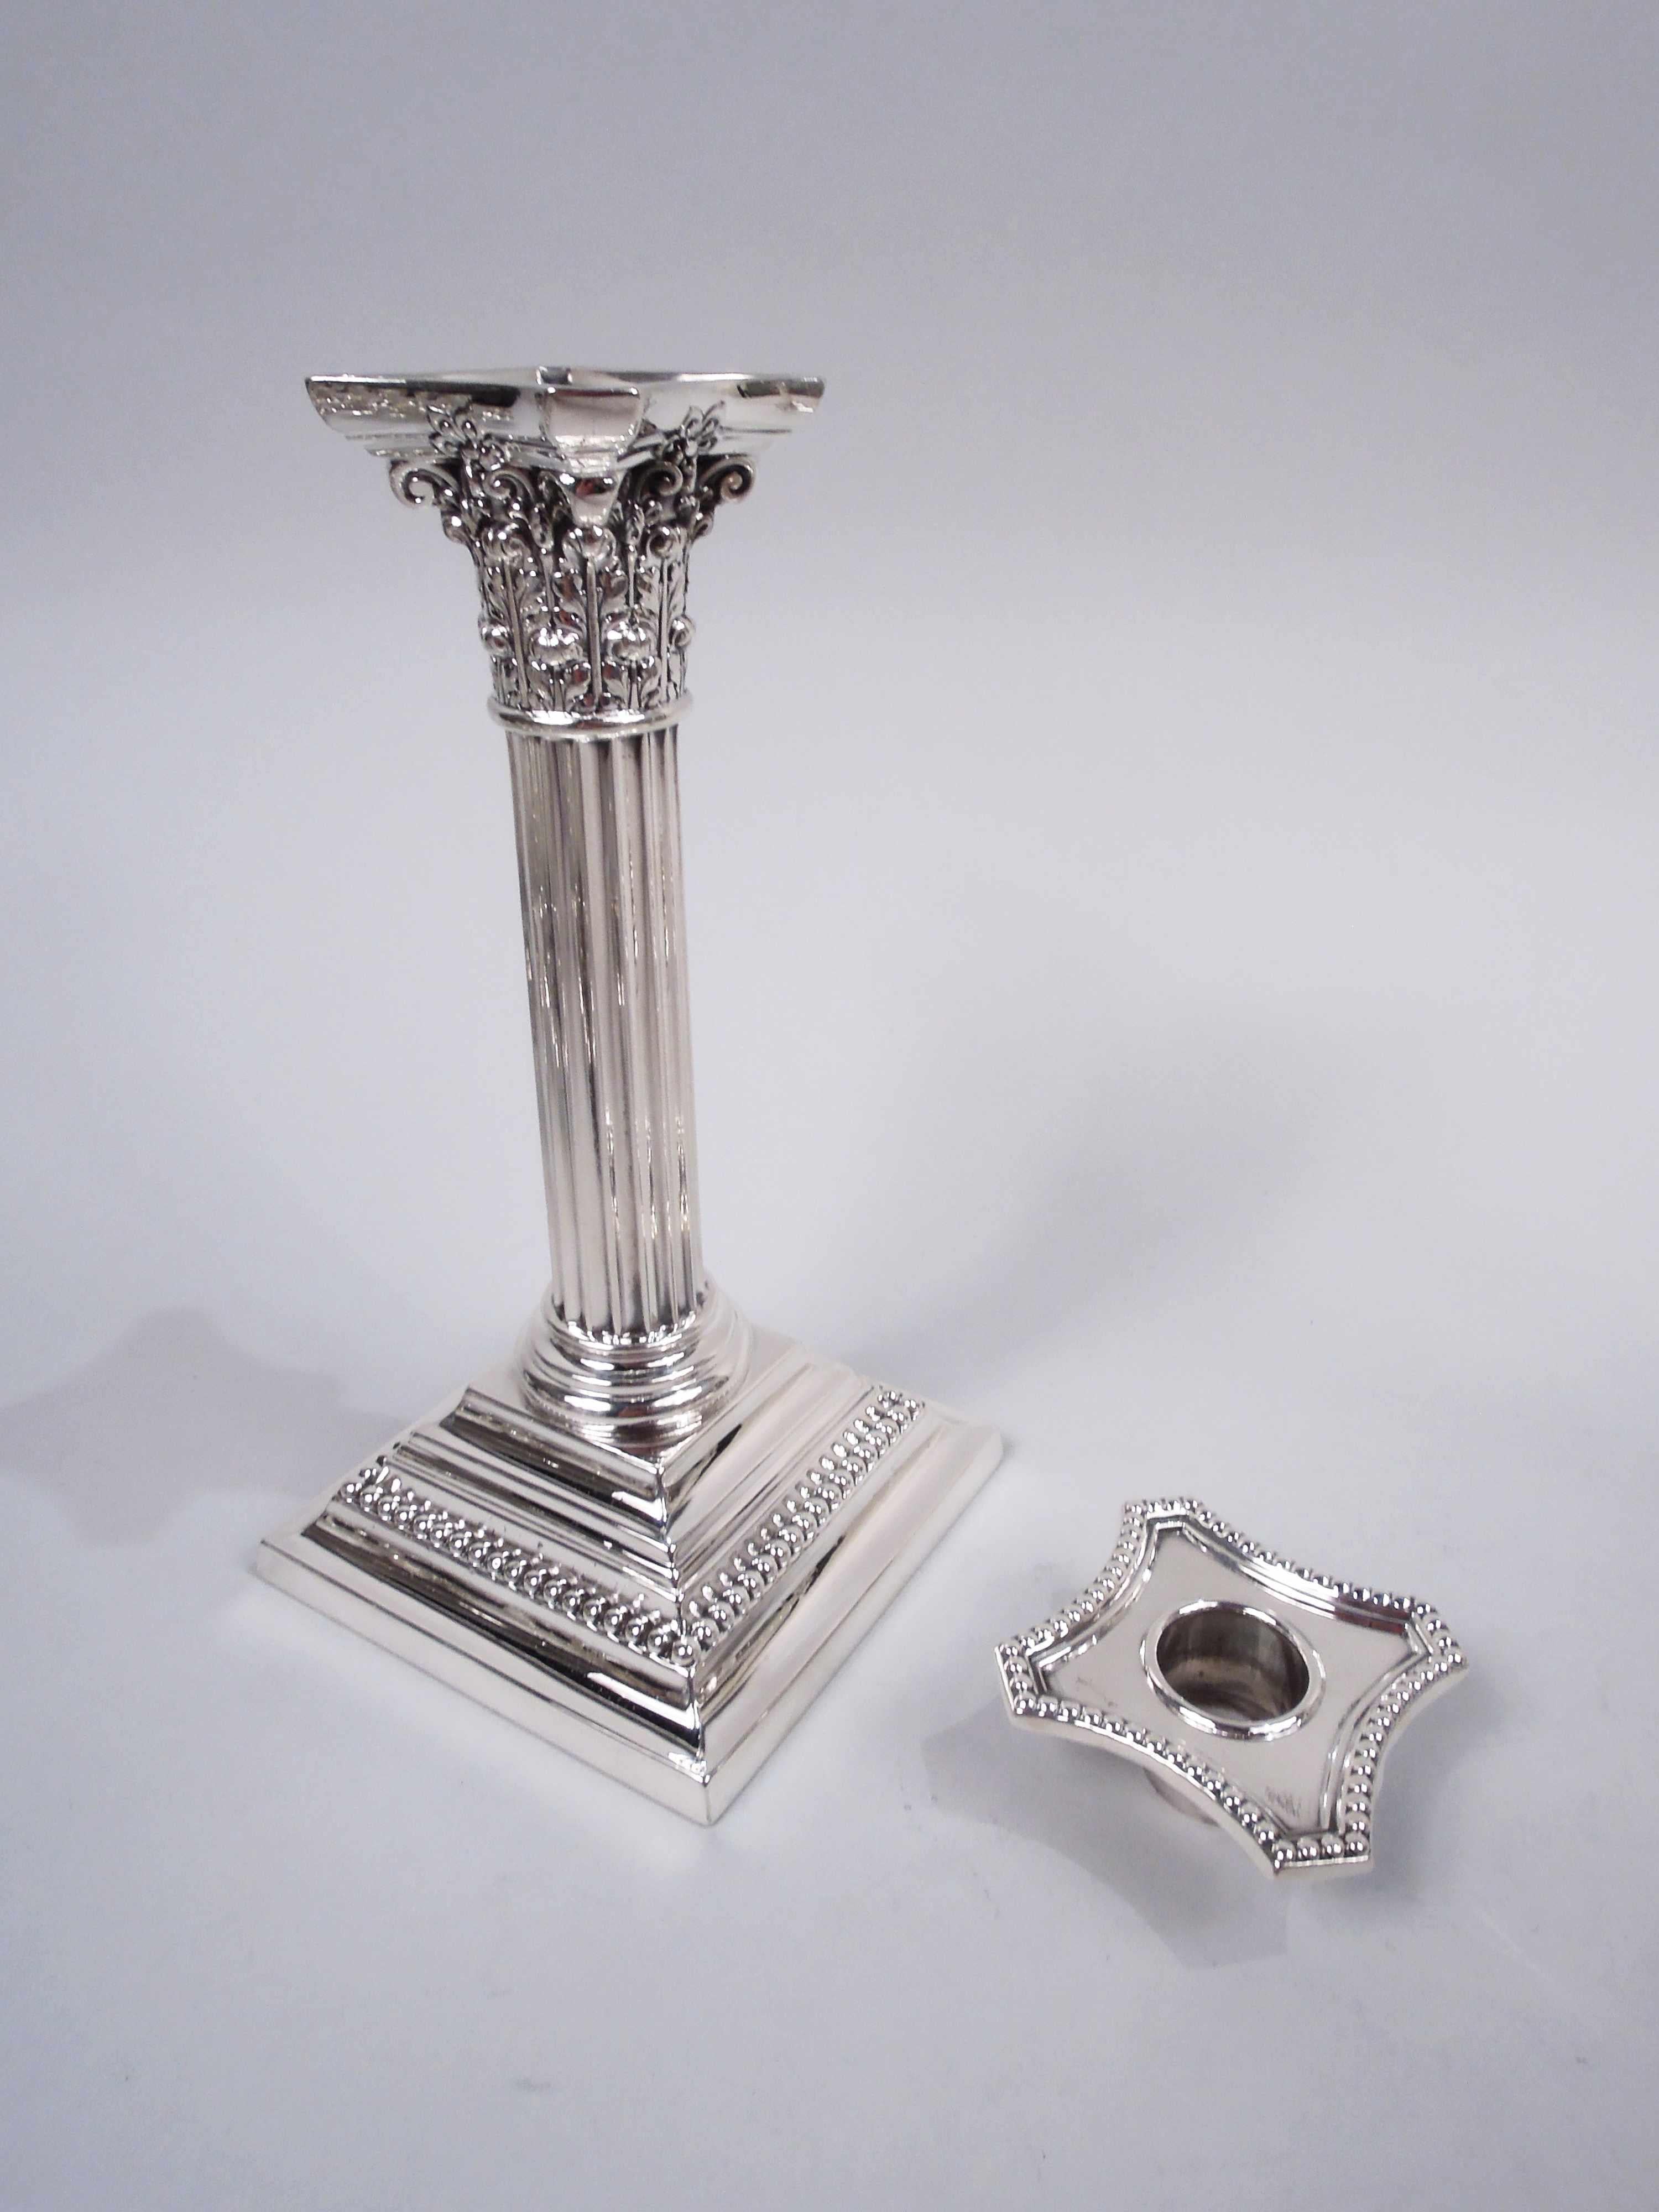 Pair of Edwardian Classical sterling silver column candlesticks. Made by Gorham in Providence in 1911-15. Each: Column with fluted shaft on stepped square base. Corinthian capital with chamfered and concave bobeche. Beading. Fully marked including